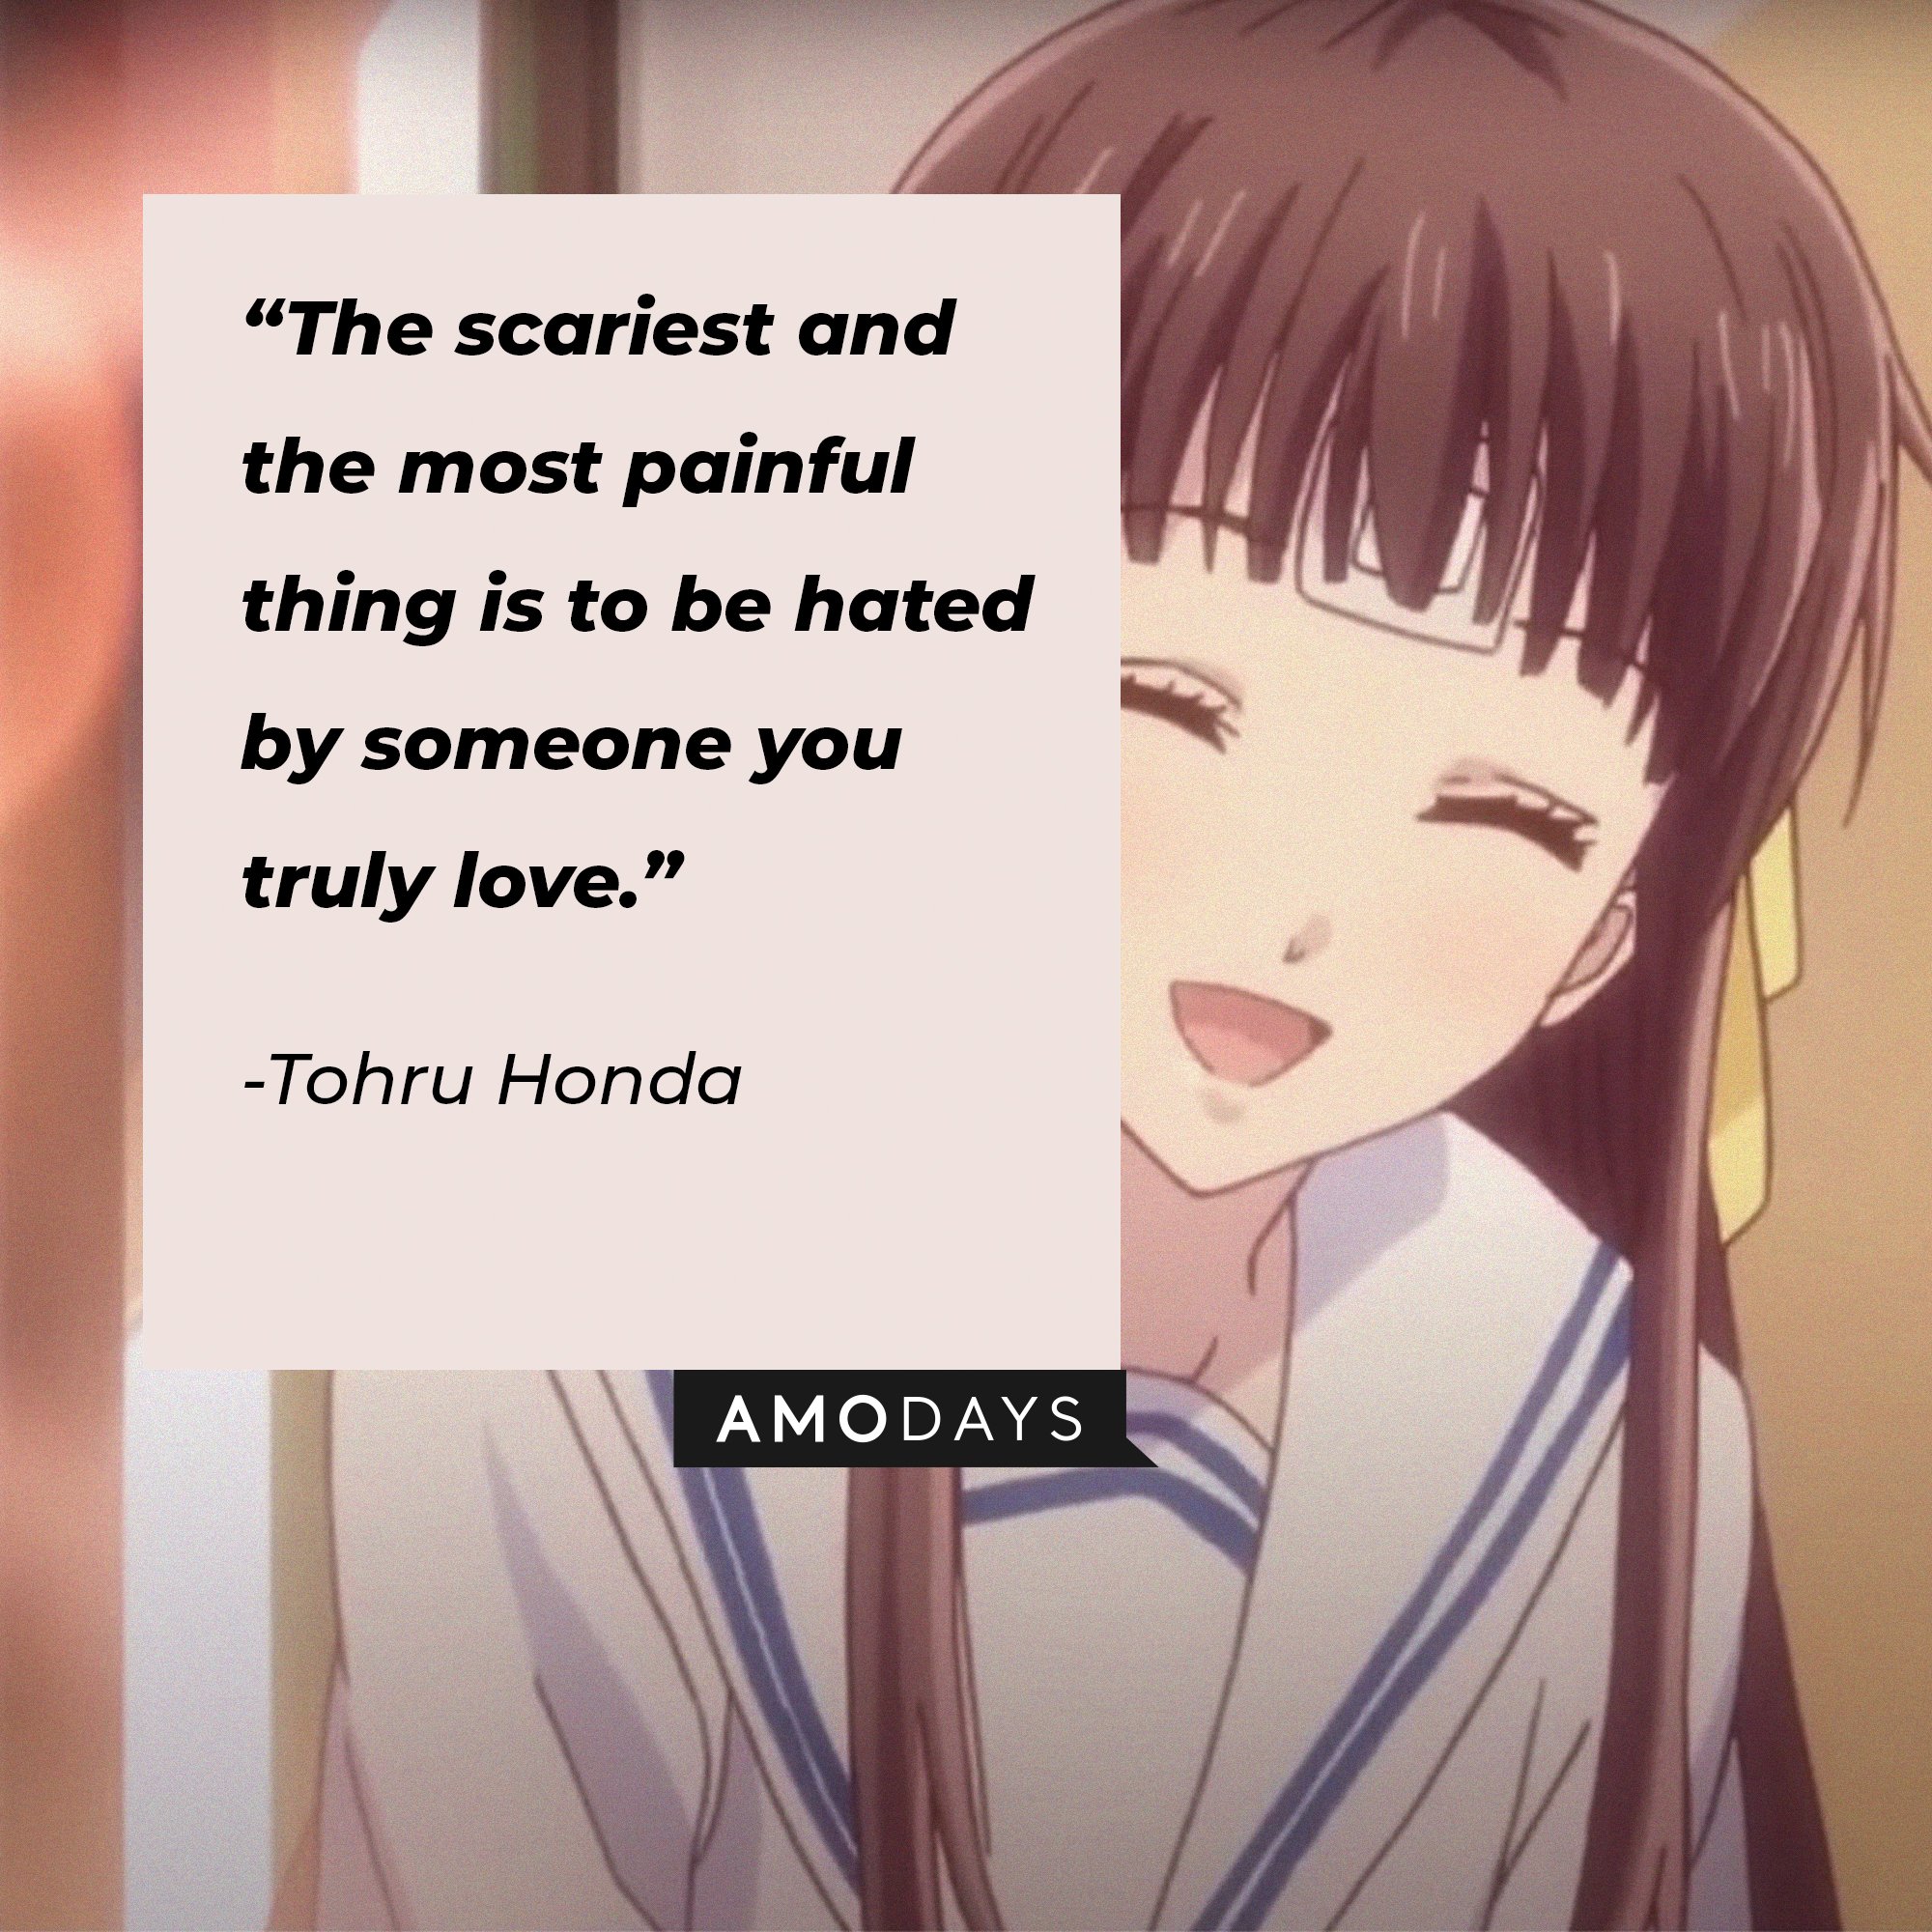 Tohru Honda’s quote: “The scariest and the most painful thing is to be hated by someone you truly love.” | Image: AmoDays